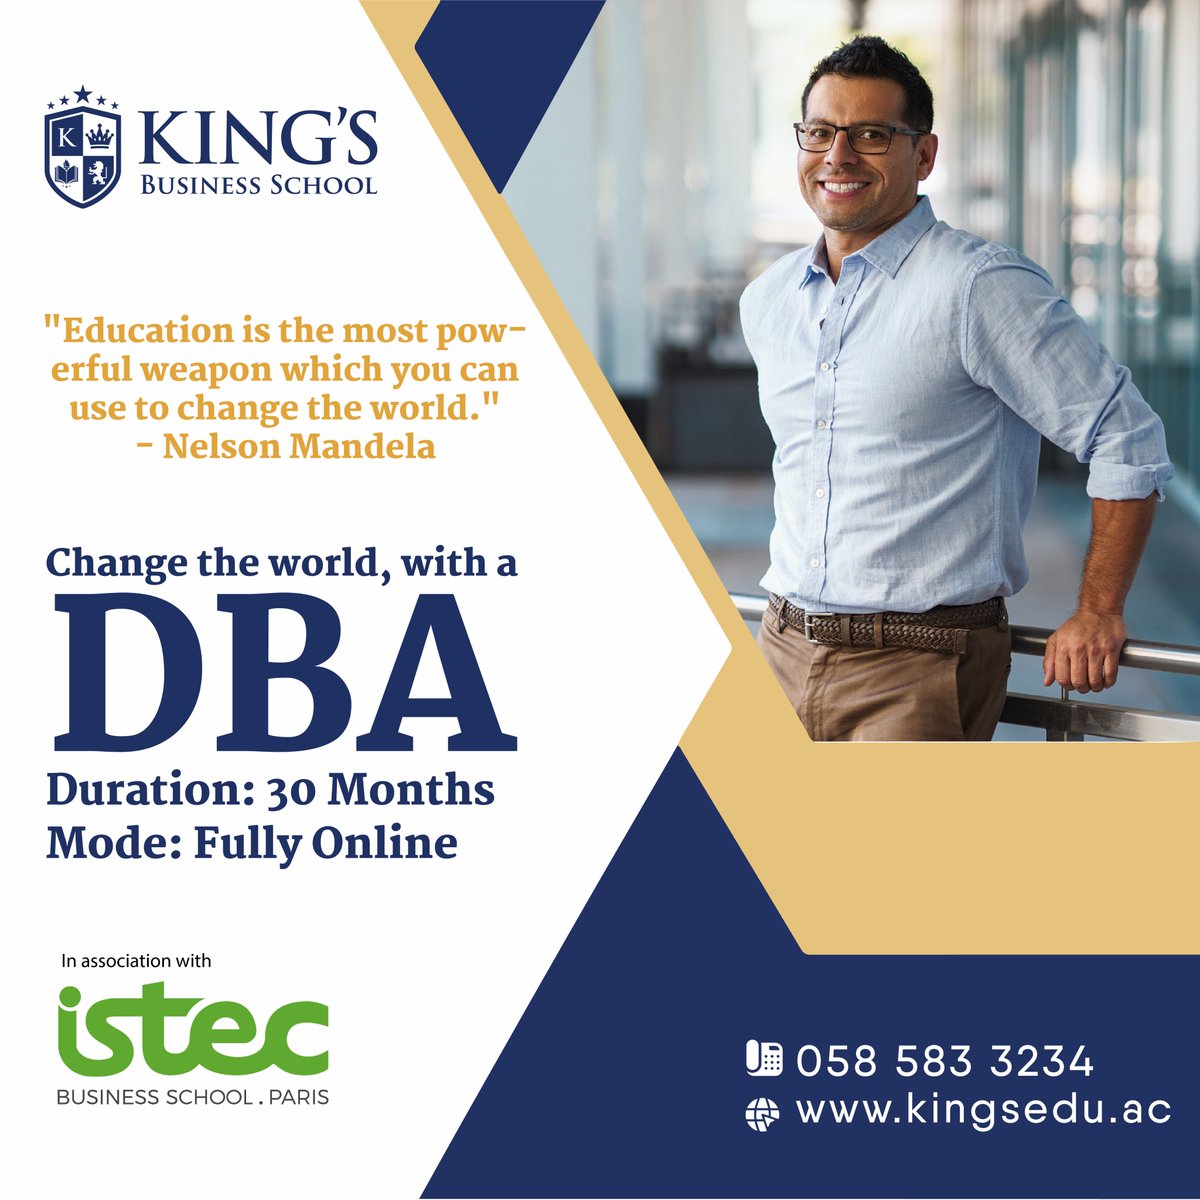 Experience personal growth, heightened self-confidence, enhanced leadership capabilities and much more with our DBA programme.  kingsedu.ac/istec-dba/

#DBA #doctorateofbusinessadministration #personalgrowth #selfconfidence #leadership #weekendworkshop #kingsbusinessschool